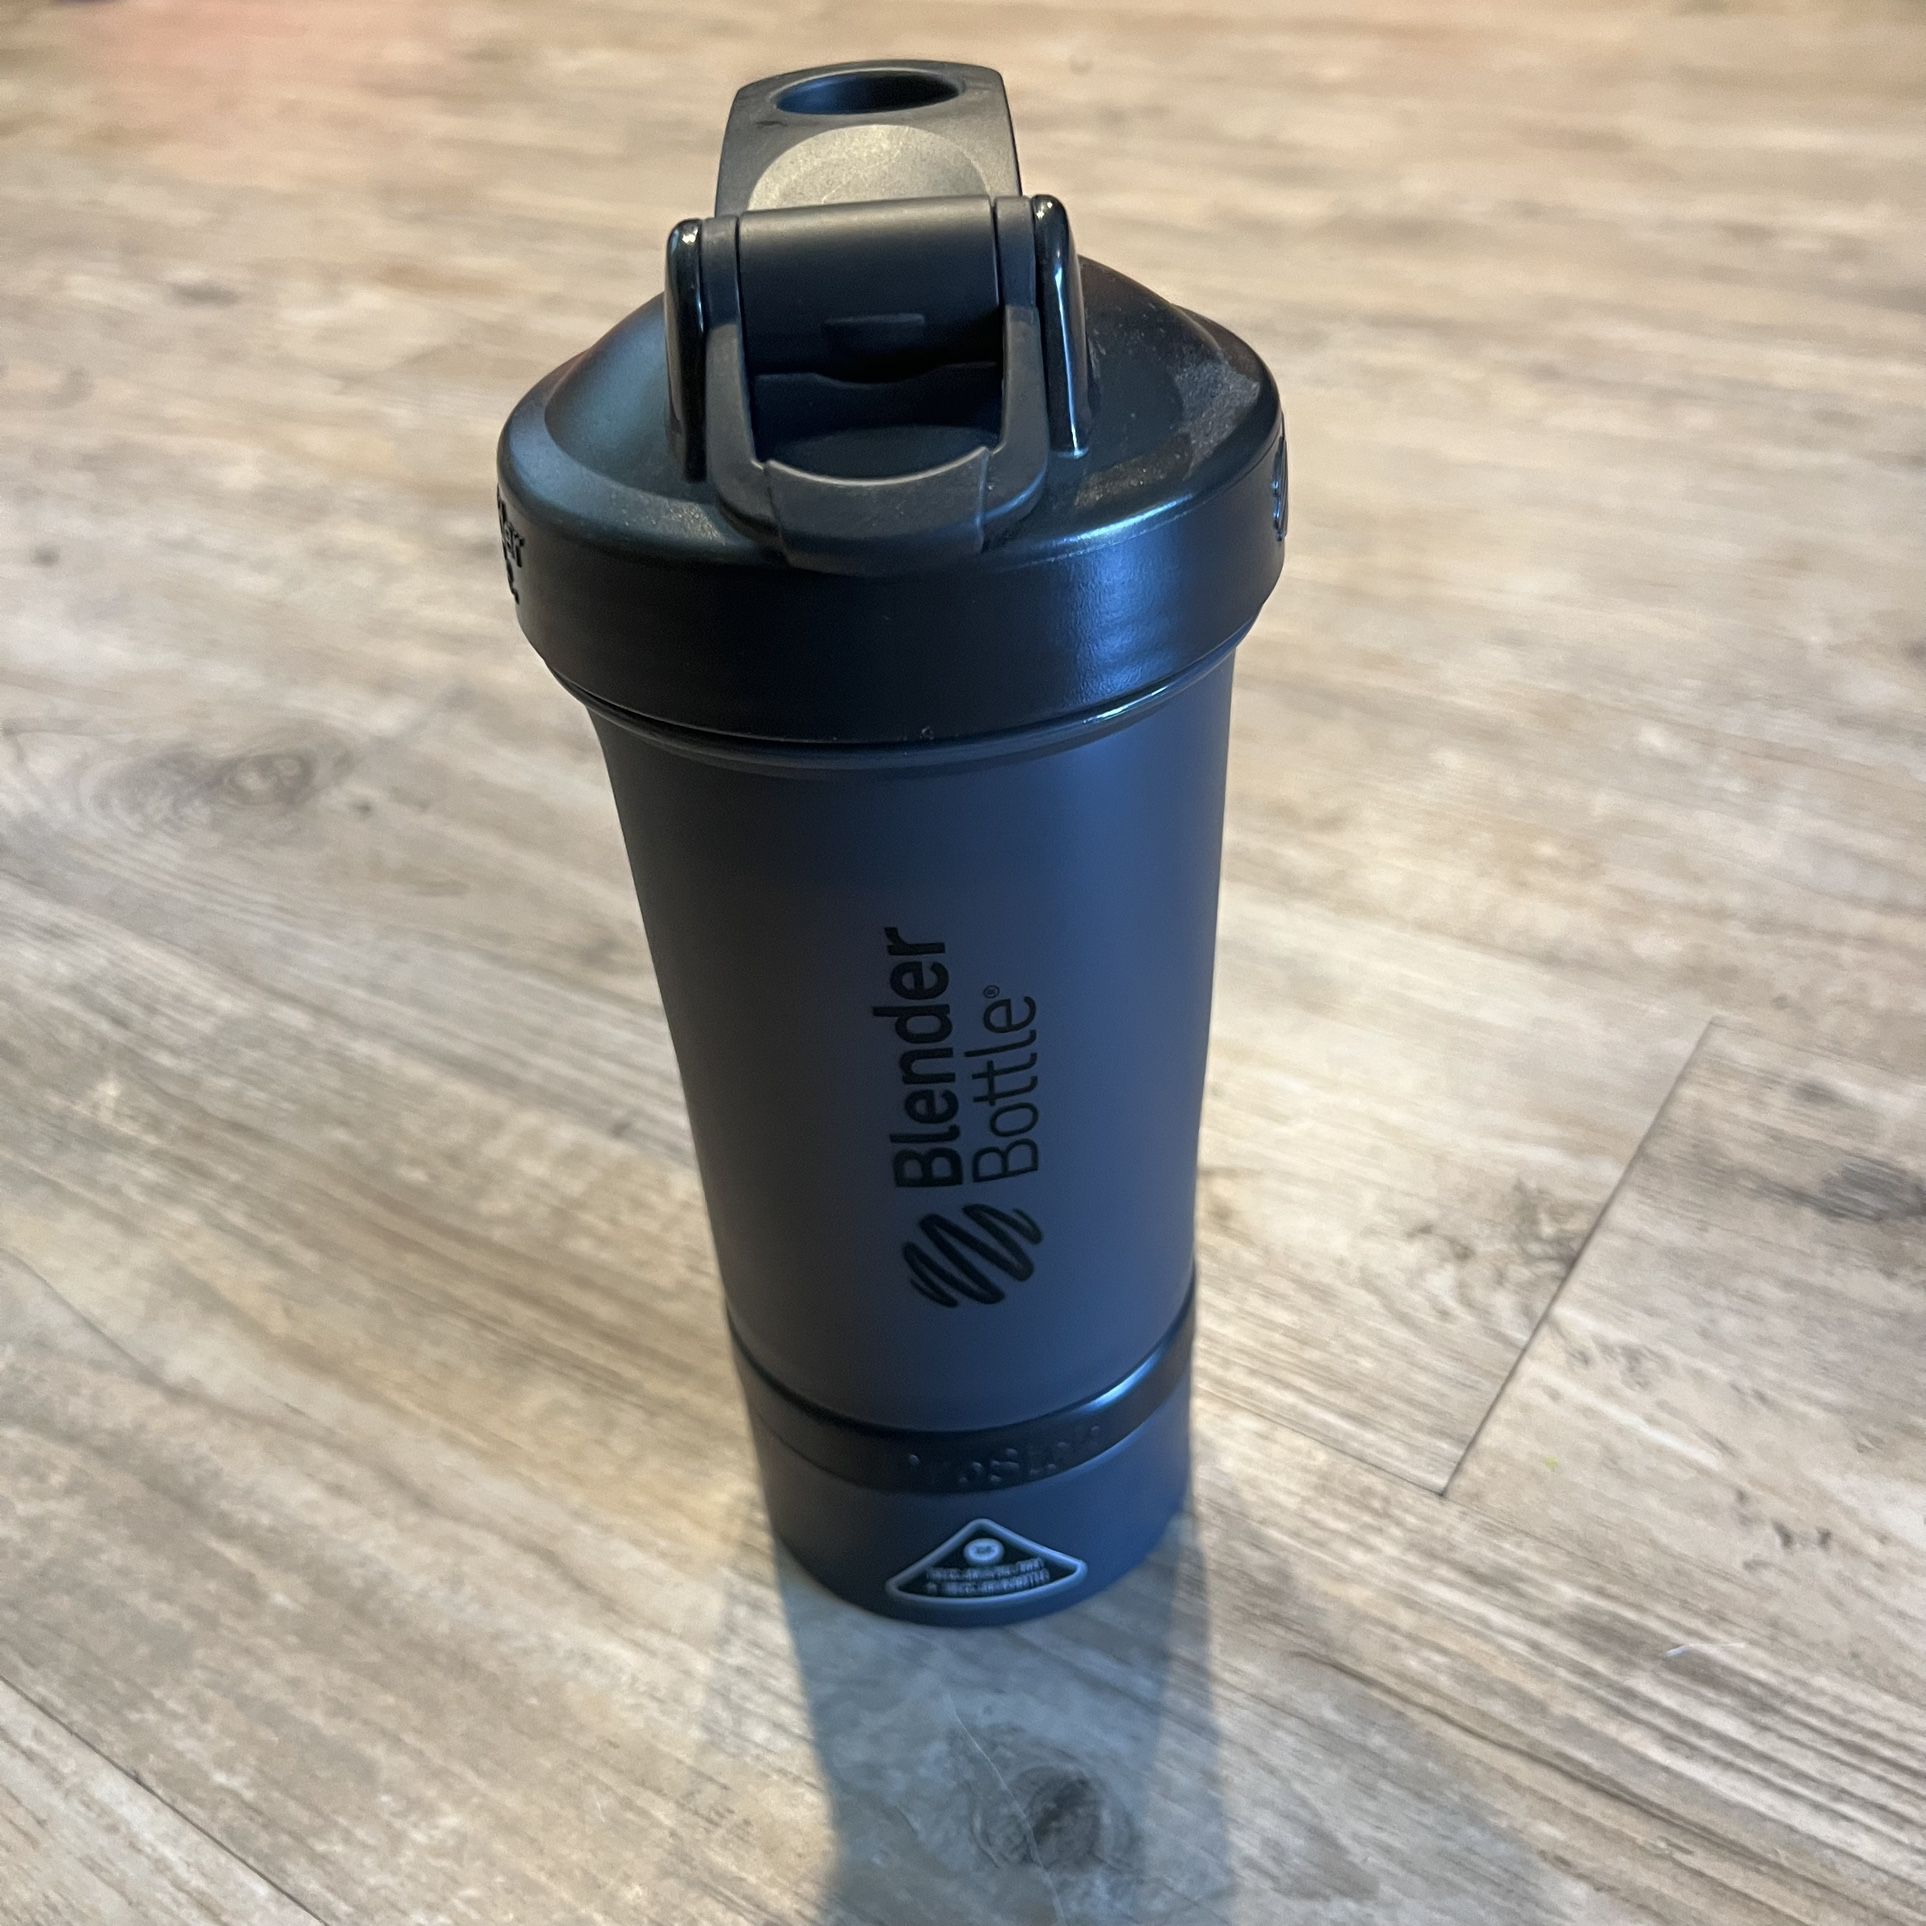 BlenderBottle Shaker Bottle with Pill Organizer and Storage for Protein  Powder, ProStak System, 22-Ounce, Black - NEW NEVER USED for Sale in  Turlock, CA - OfferUp